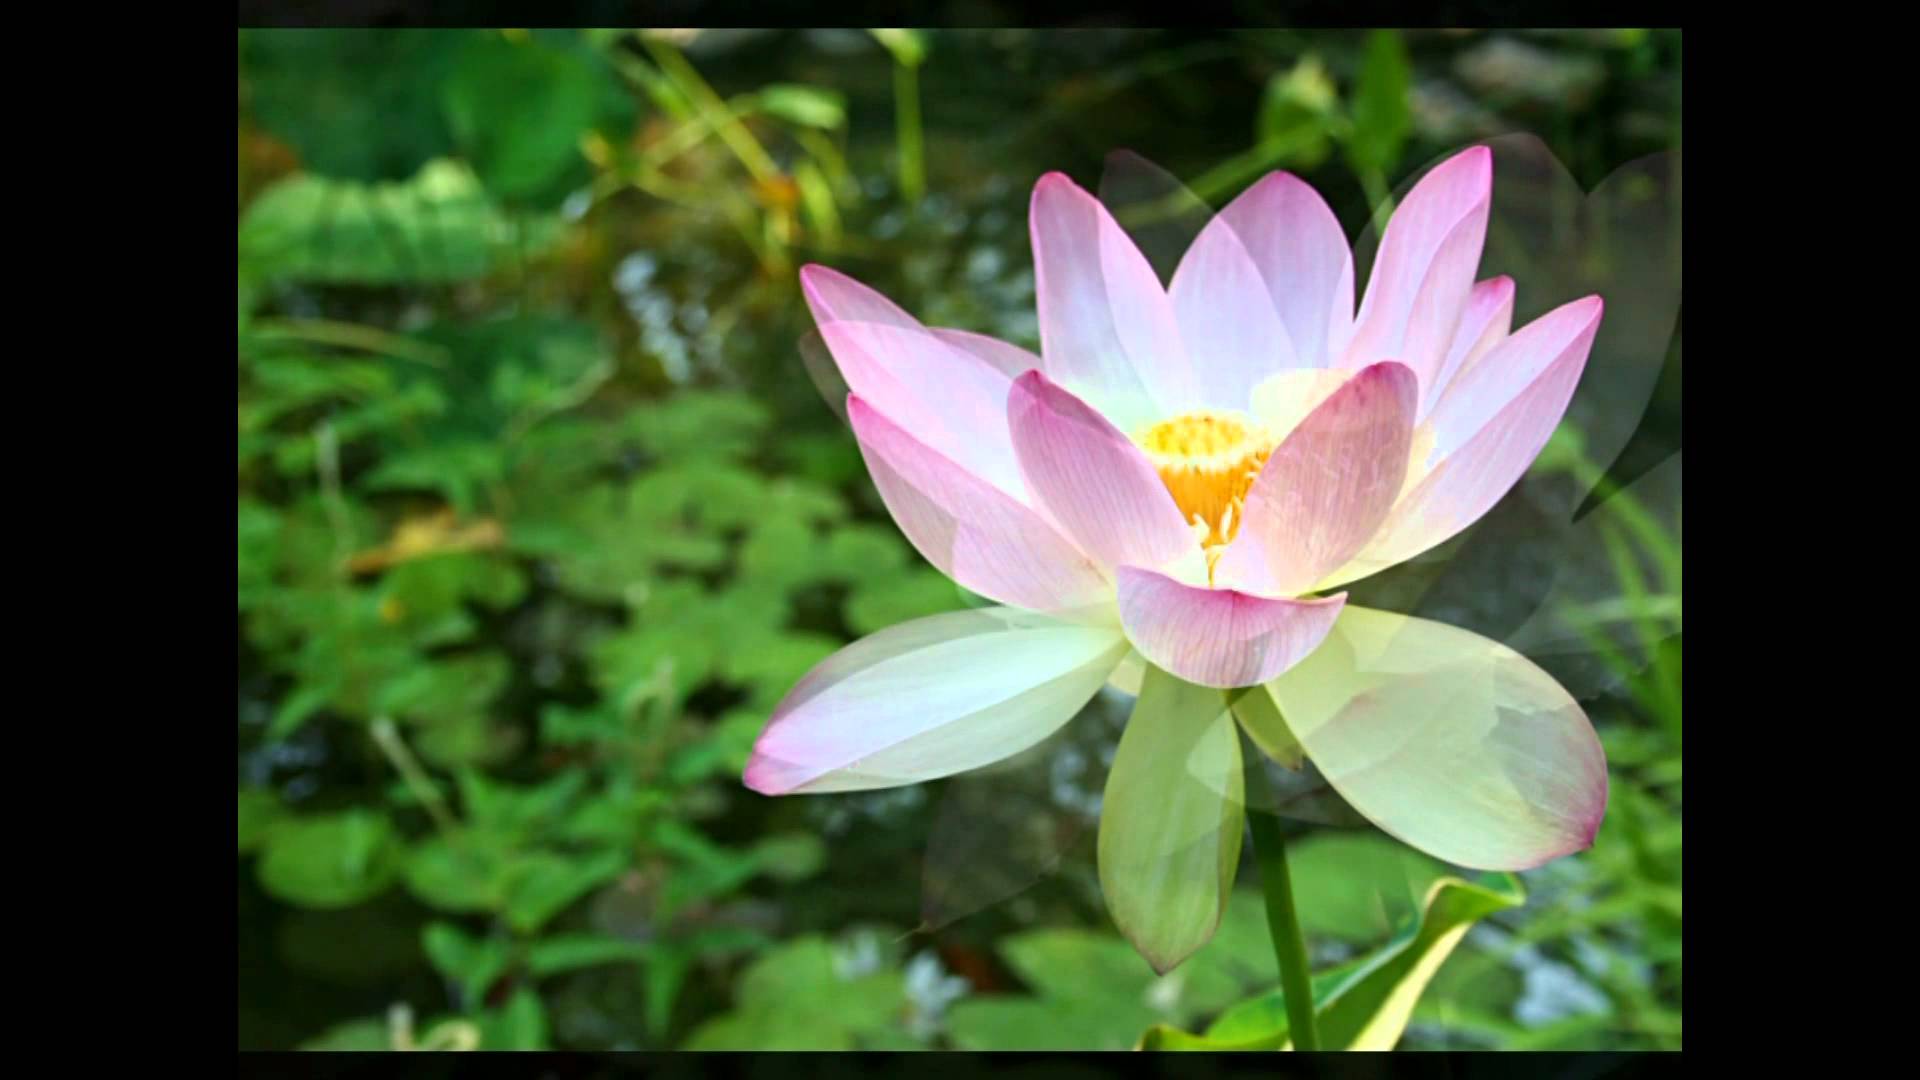 Lotus Blossom - The Life Of A Lotus Blossom - YouTube